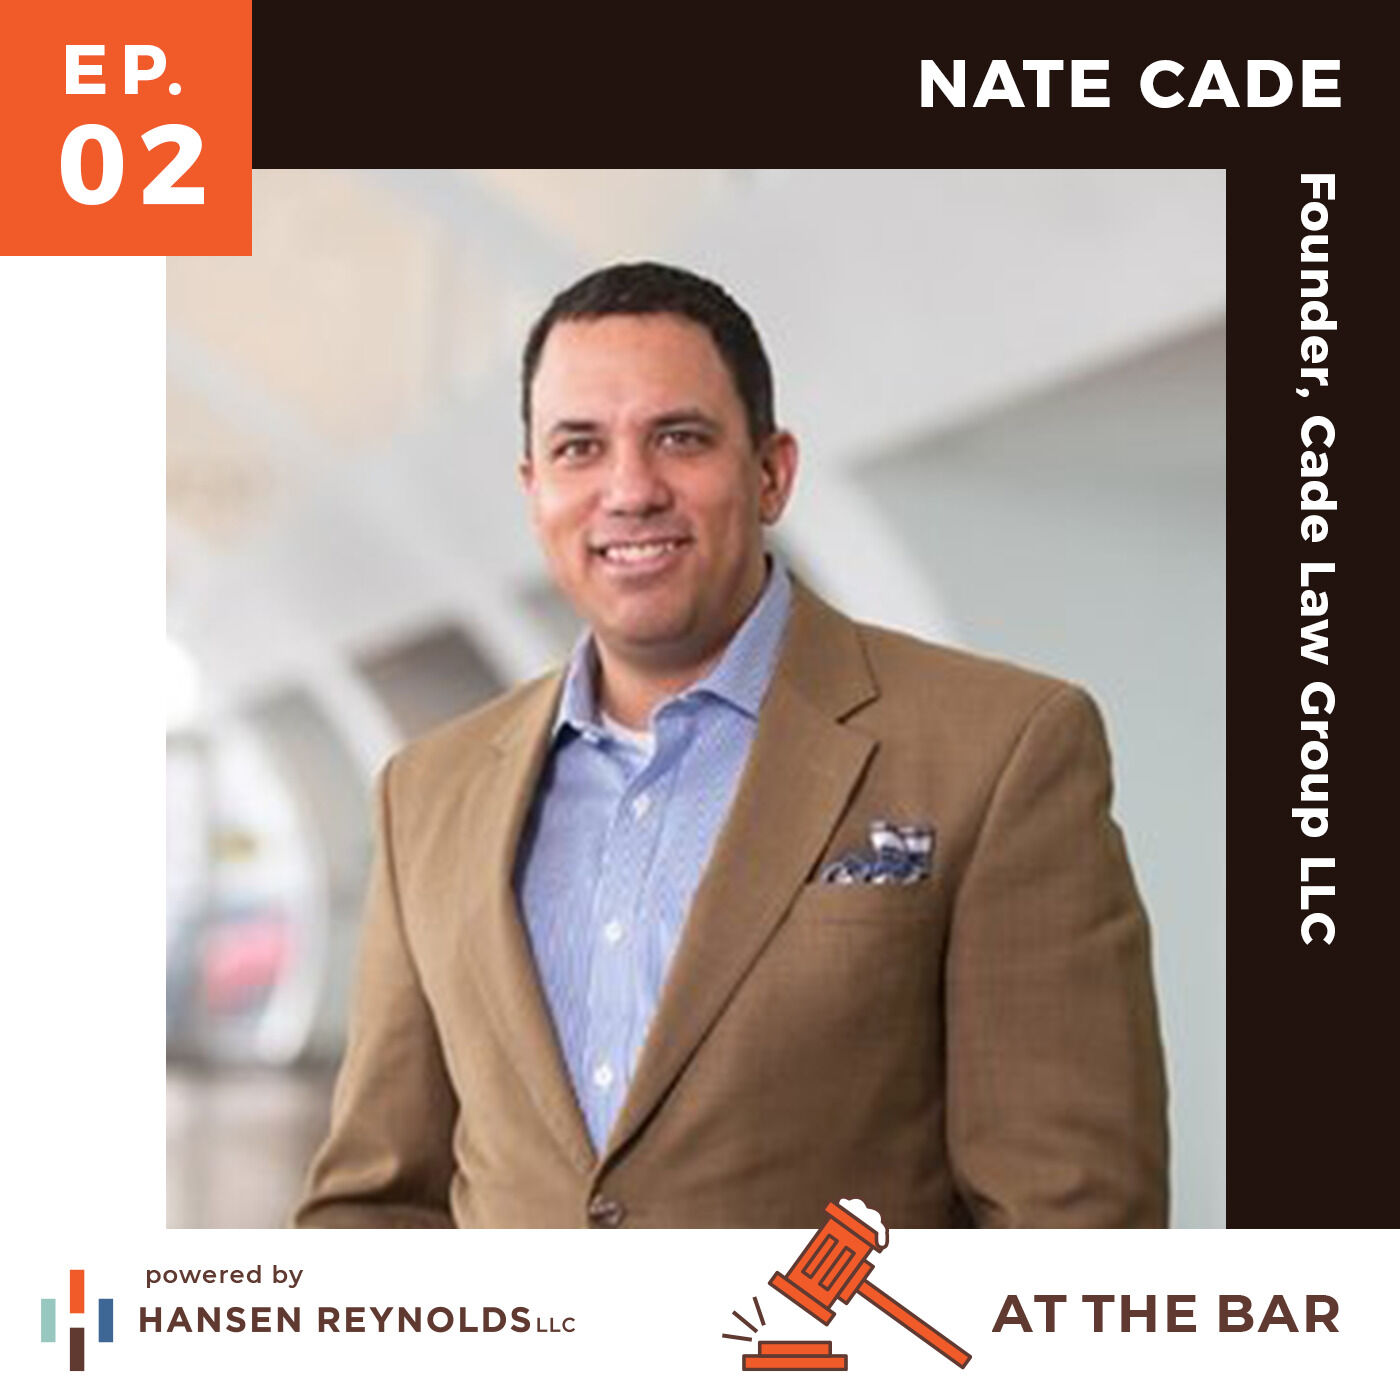 At the Bar episode two cover with Nate Cade